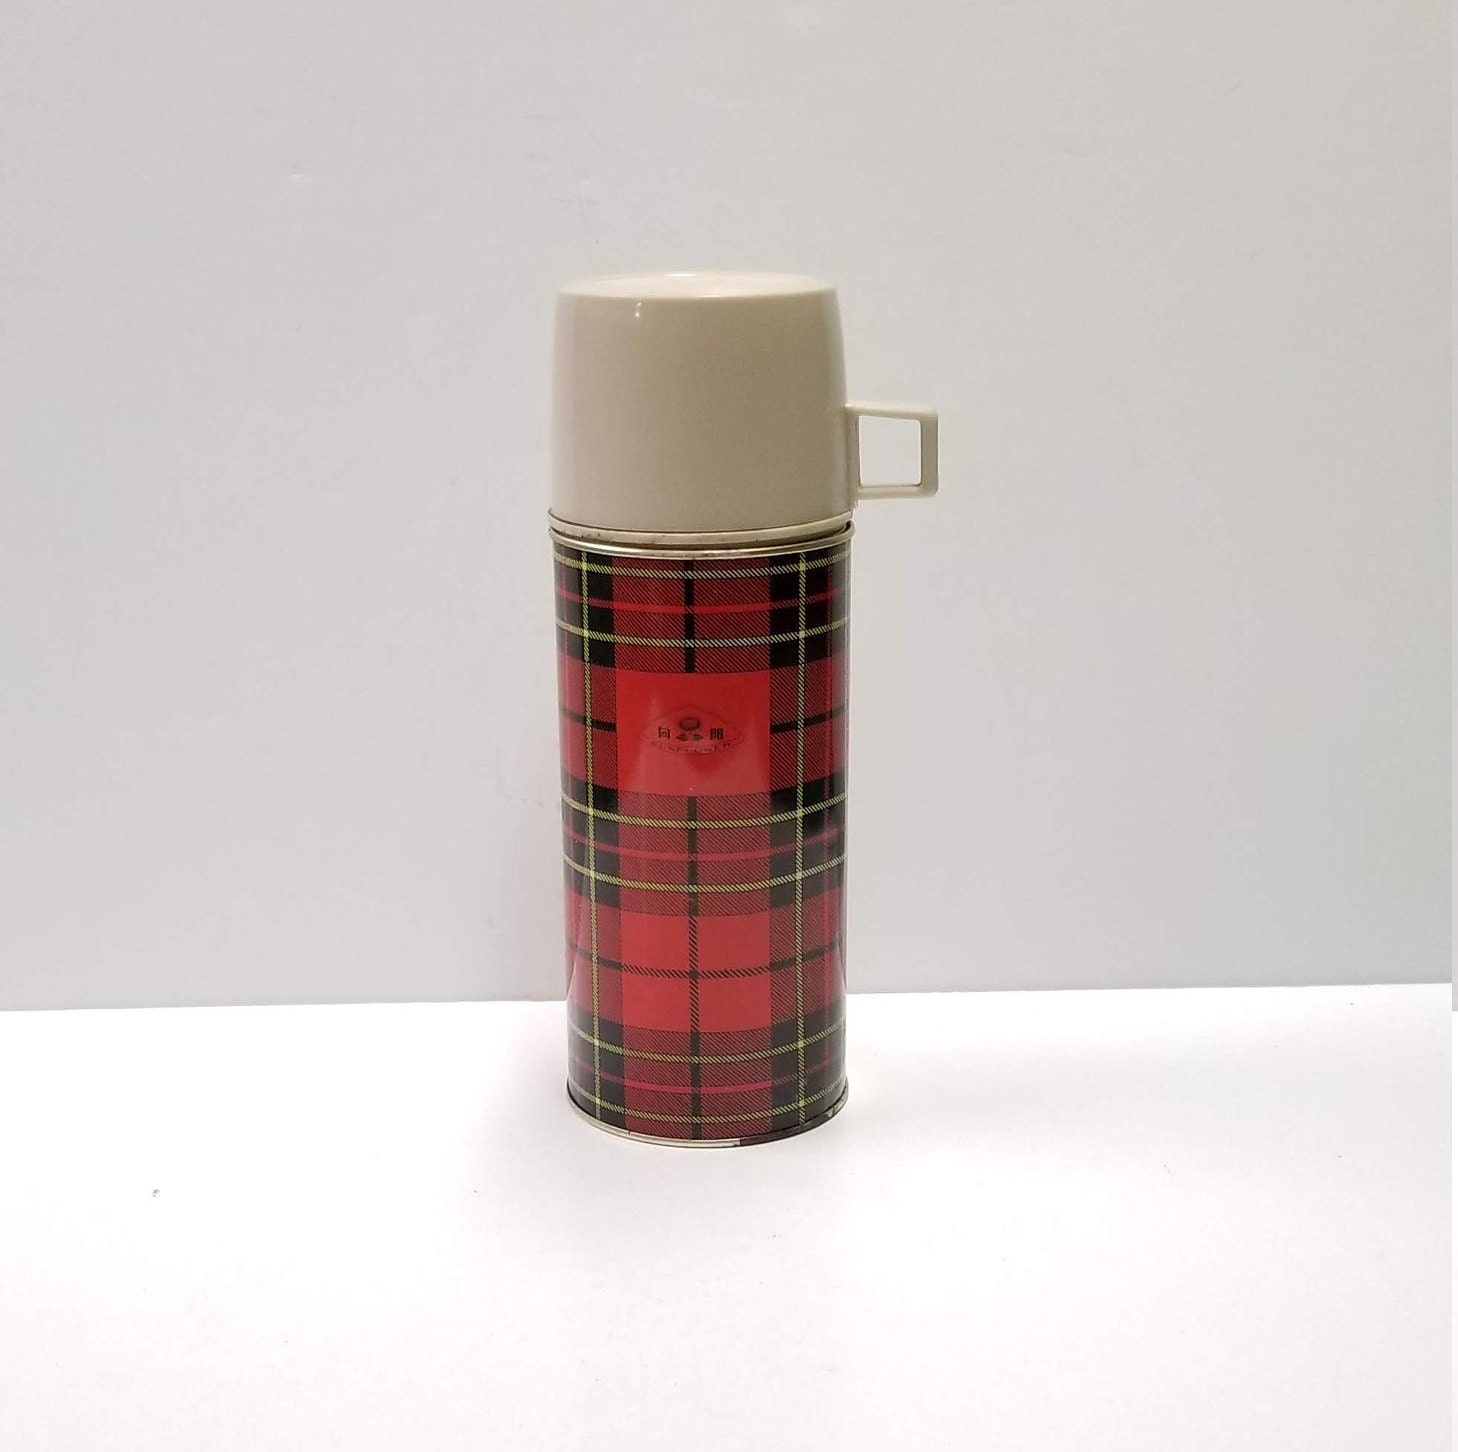 Vintages Red Thermos brand thermos 1 ltr